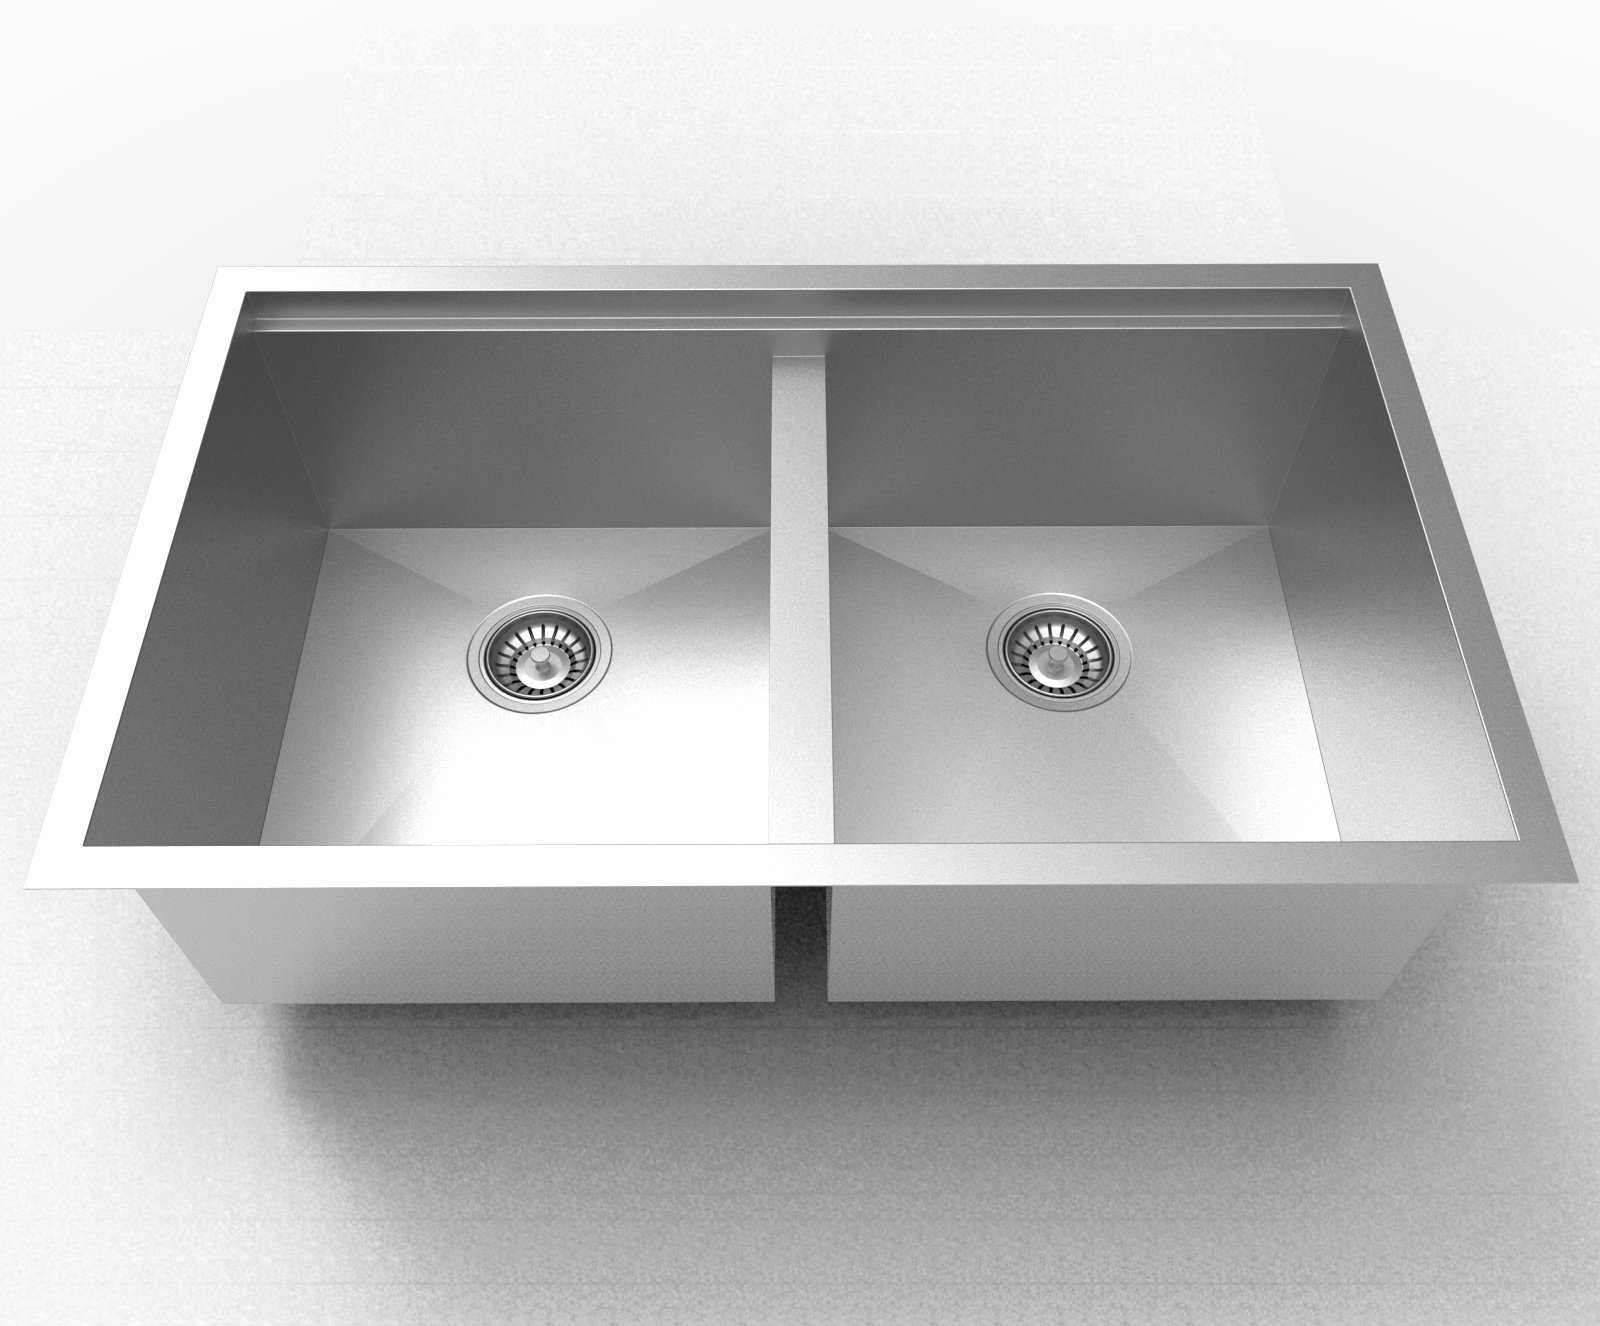 R0 Pro Station / Ledge Sink 5050 – Noble Stone Collection